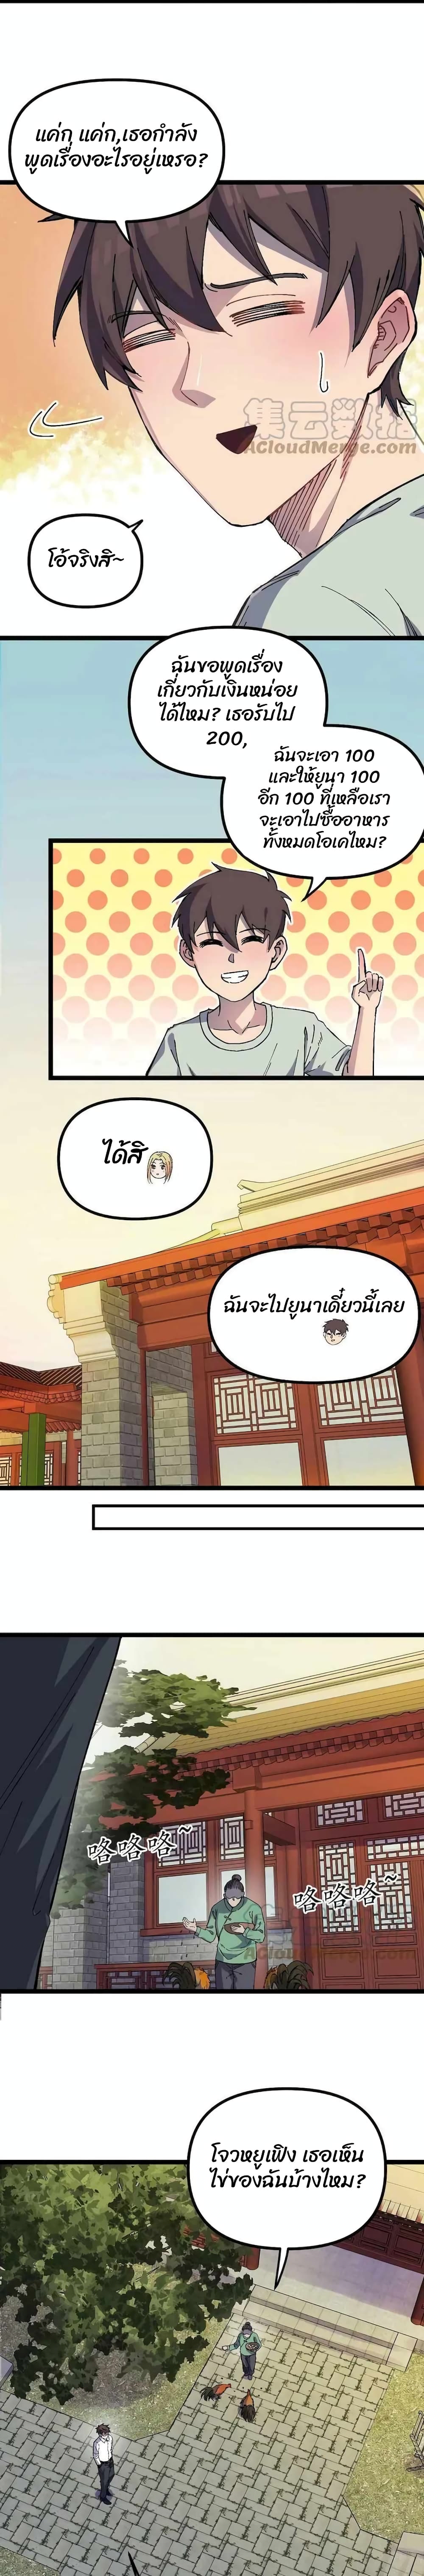 Rebirth Back to 1983 to Be a Millionaire ตอนที่ 3 (6)